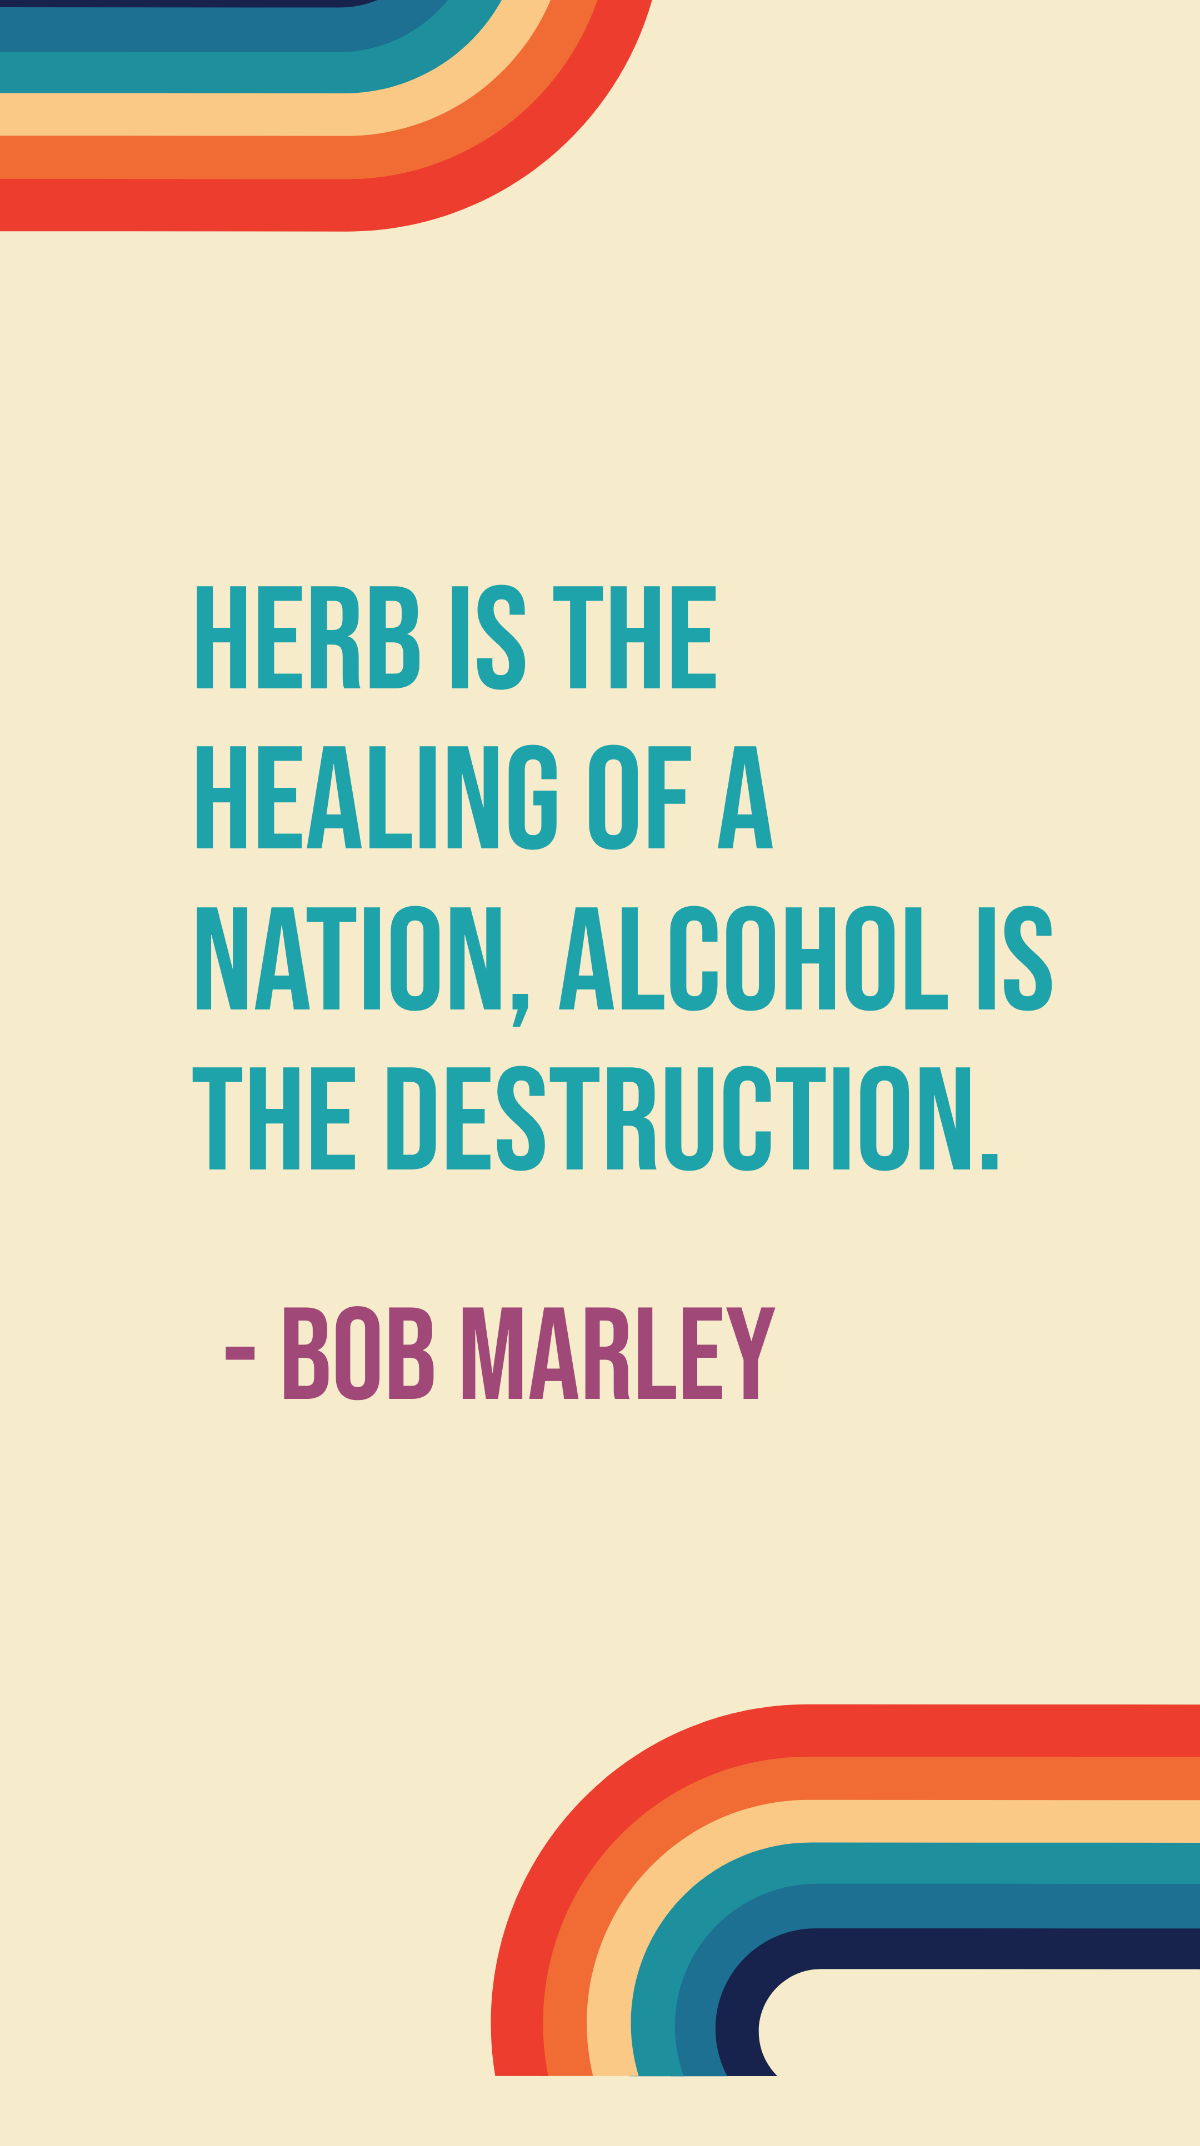 Bob Marley - Herb is the healing of a nation, alcohol is the destruction. Template